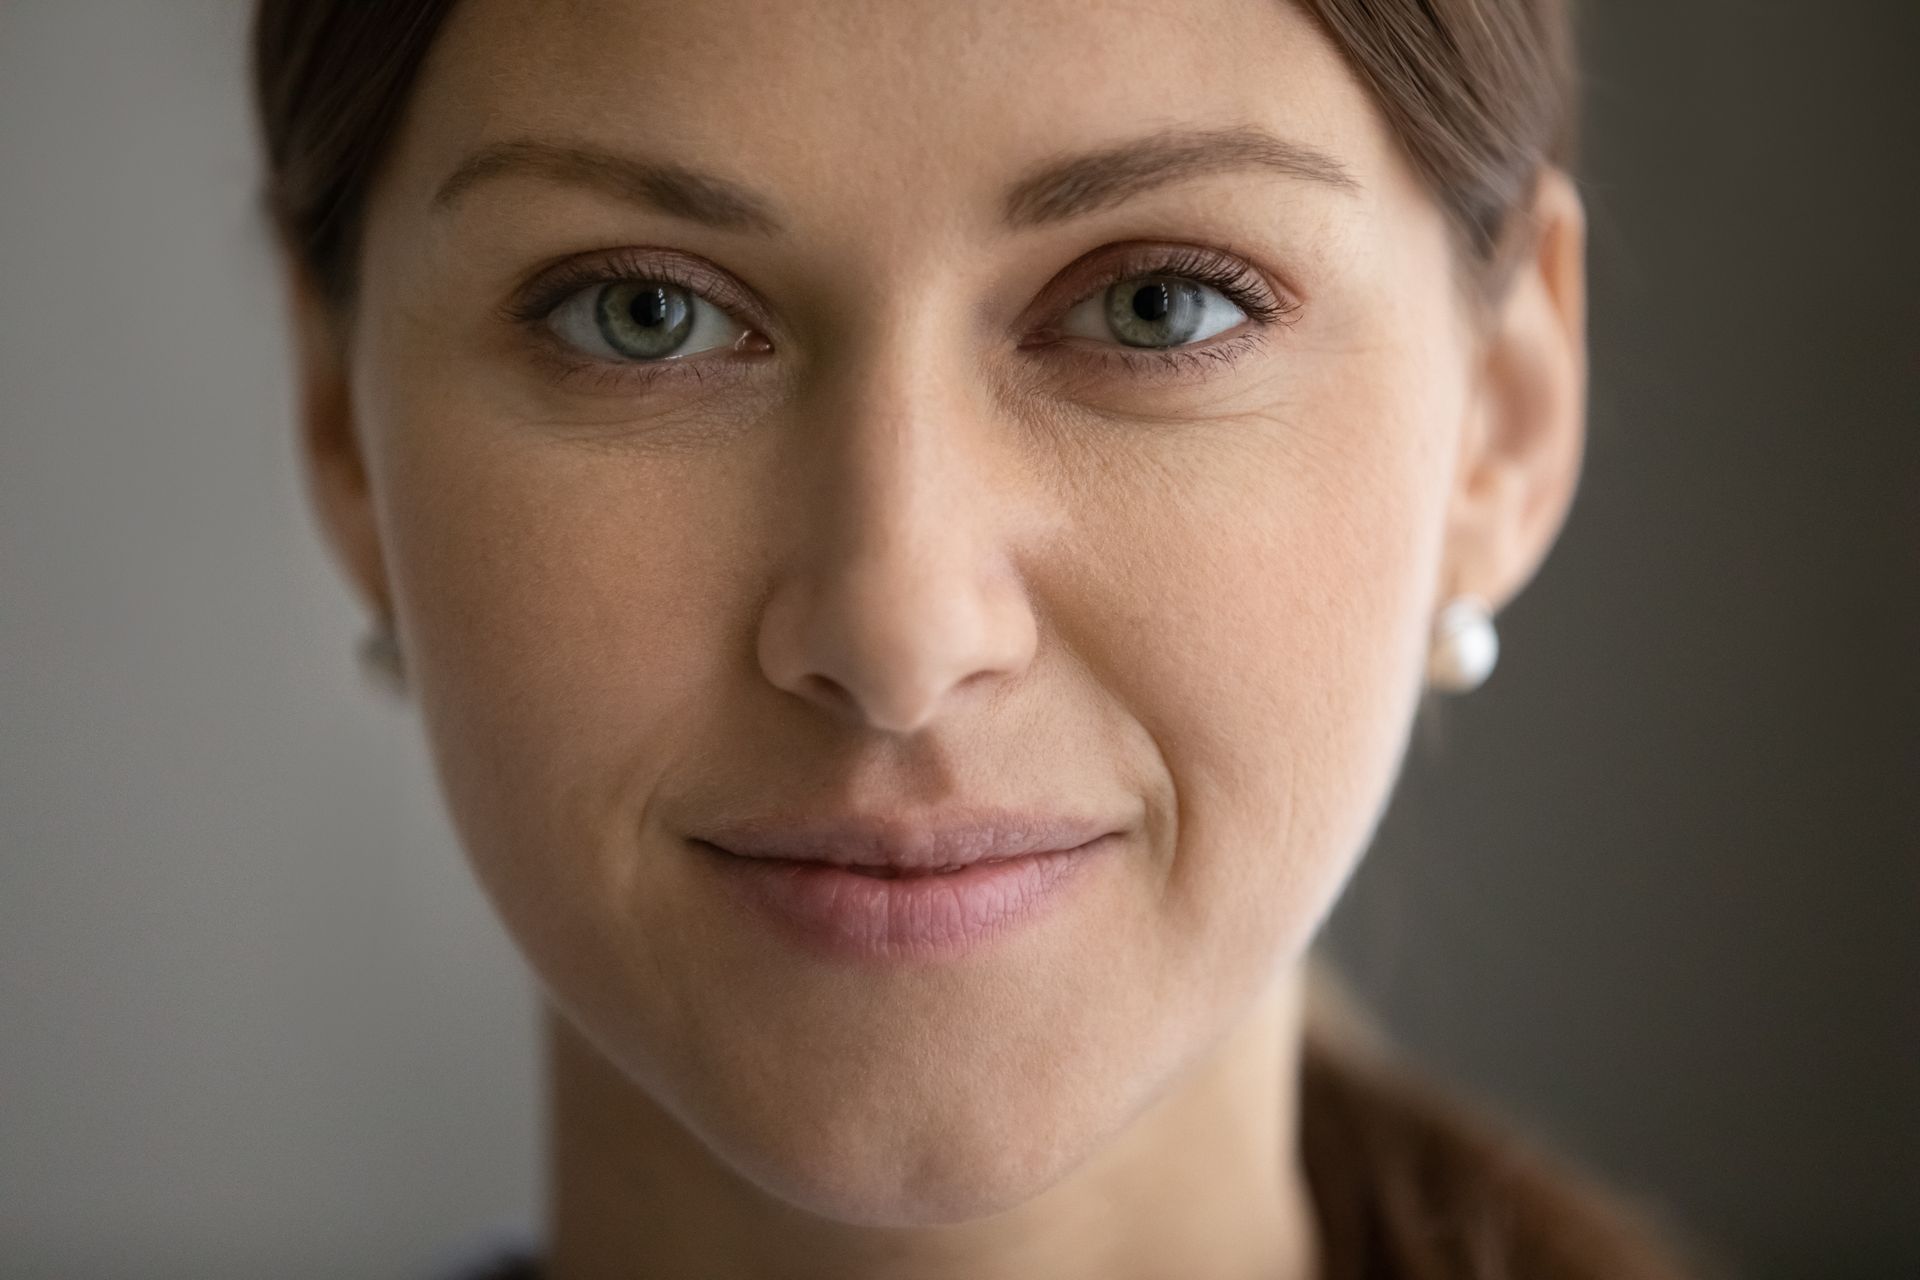 A close up of a woman 's face with a smile on her face.